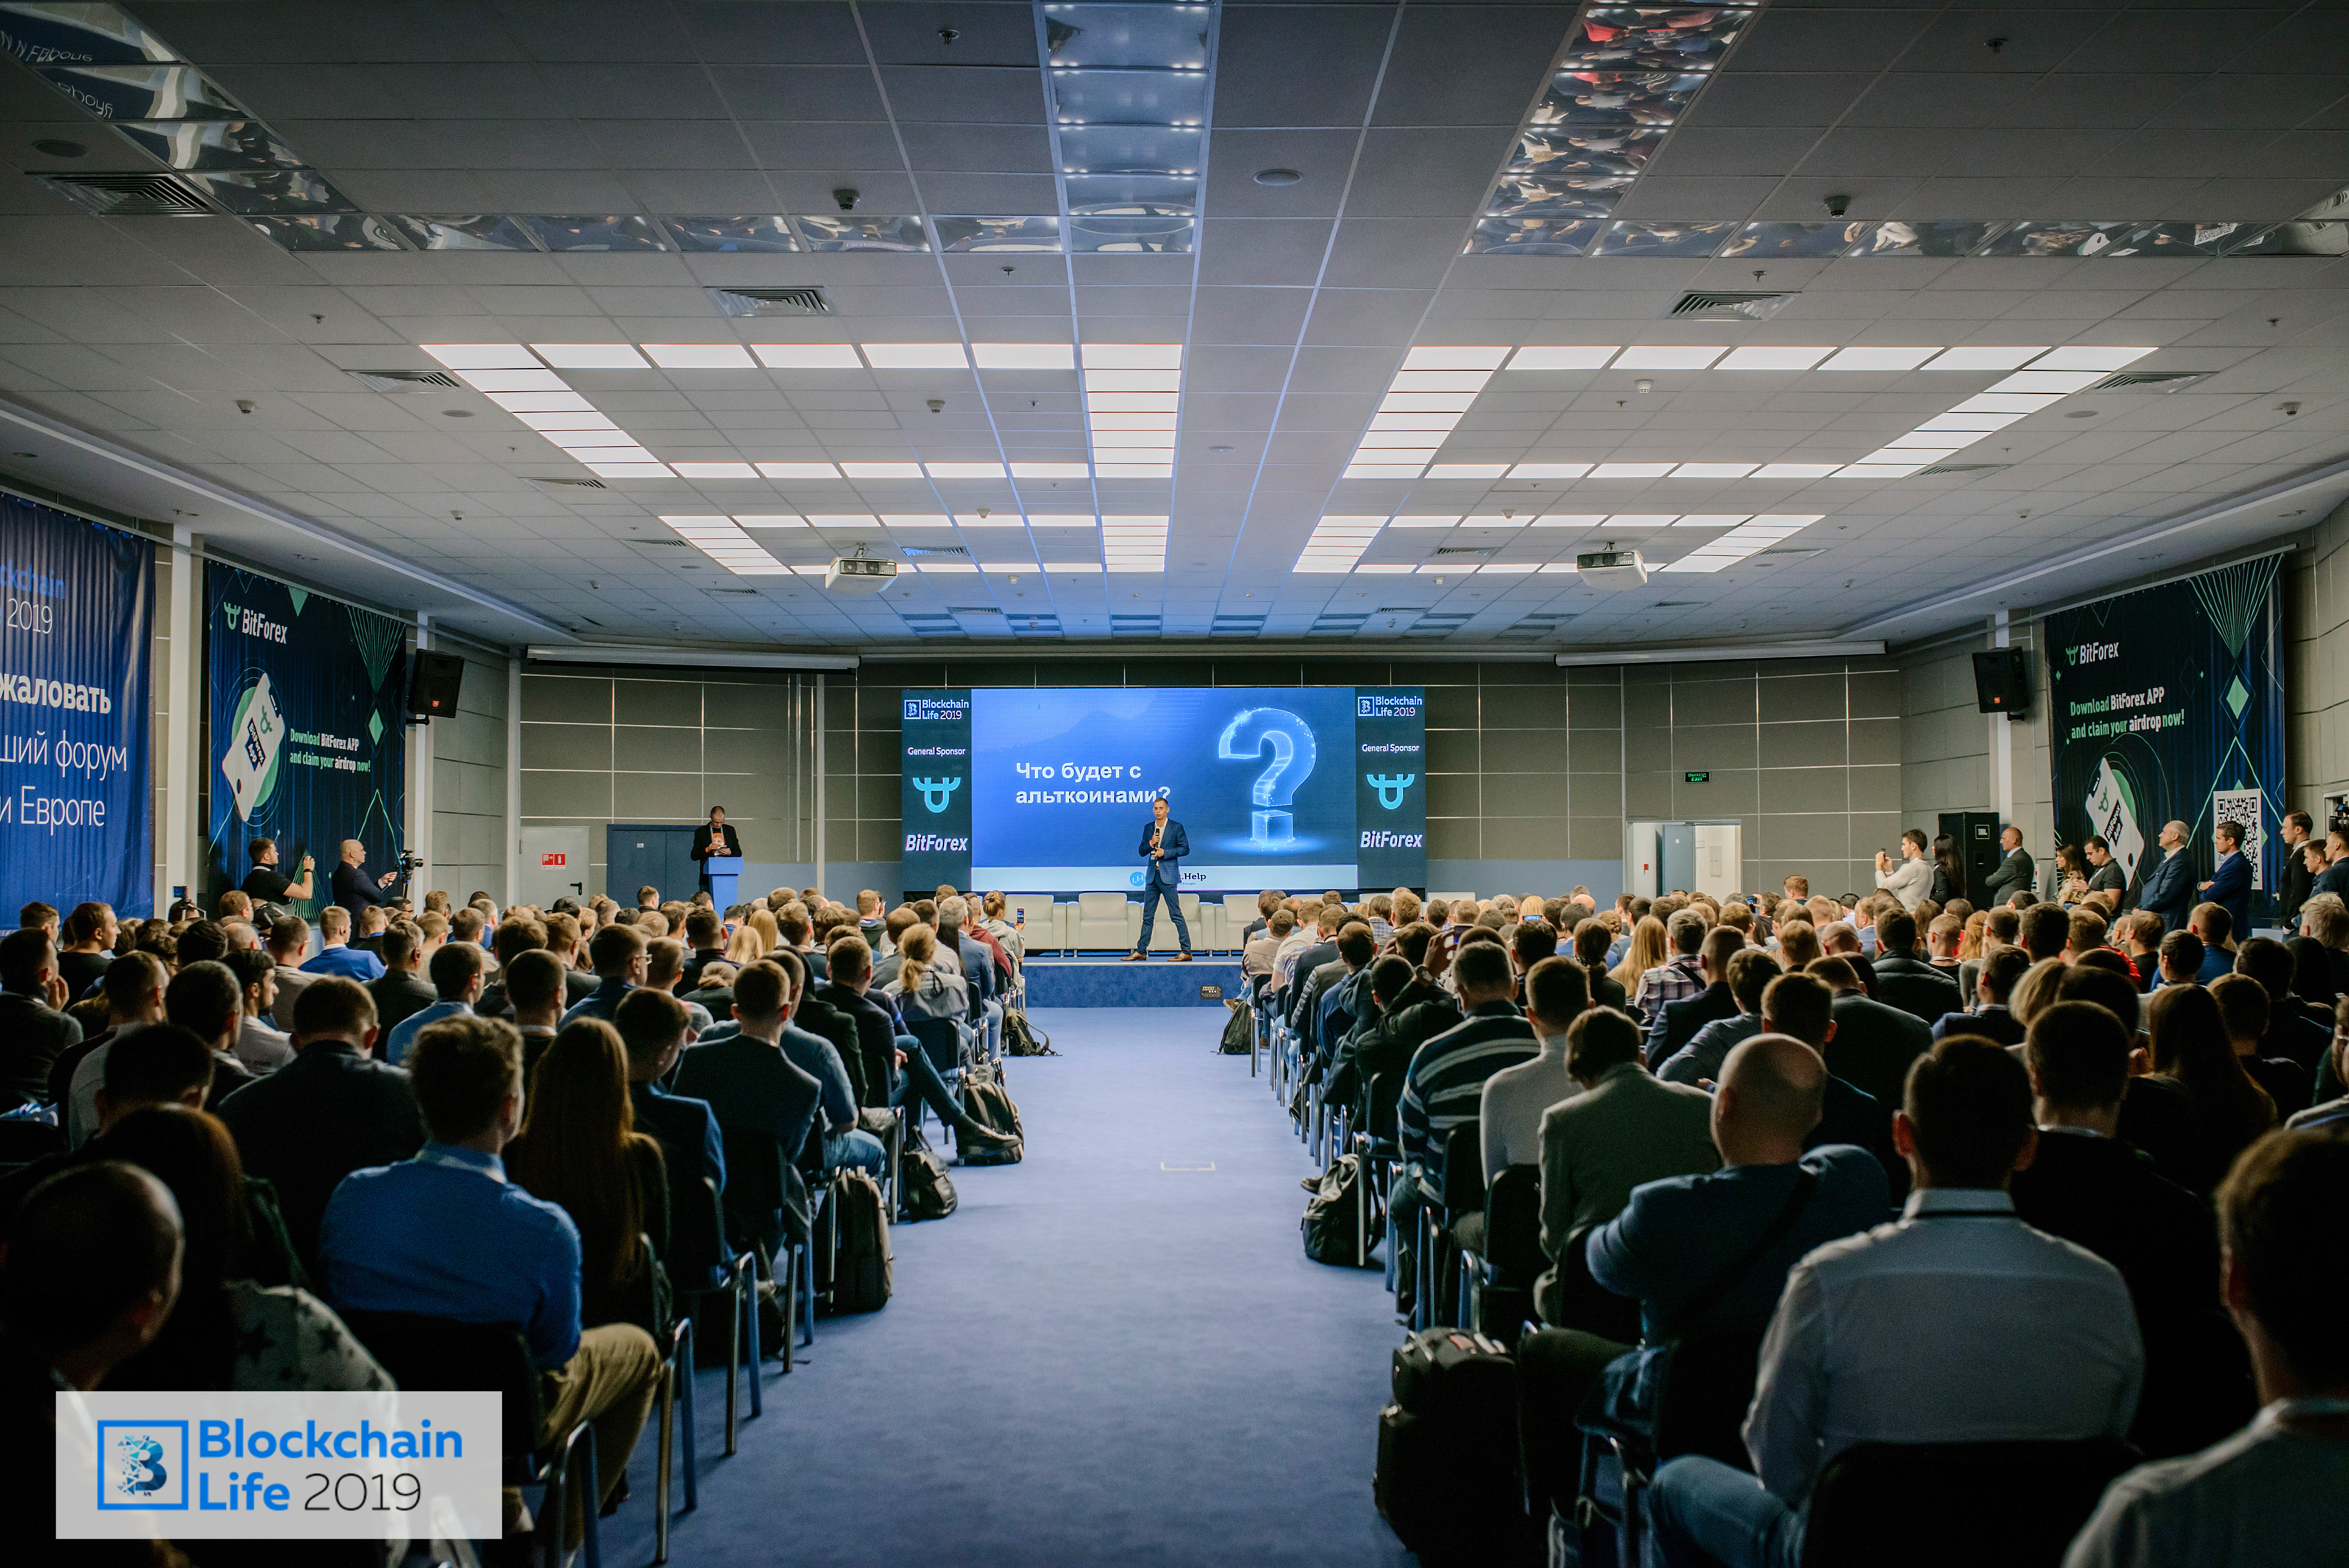 On Wednesday, October 21, Moscow will host the Blockchain Life 2020 Forum